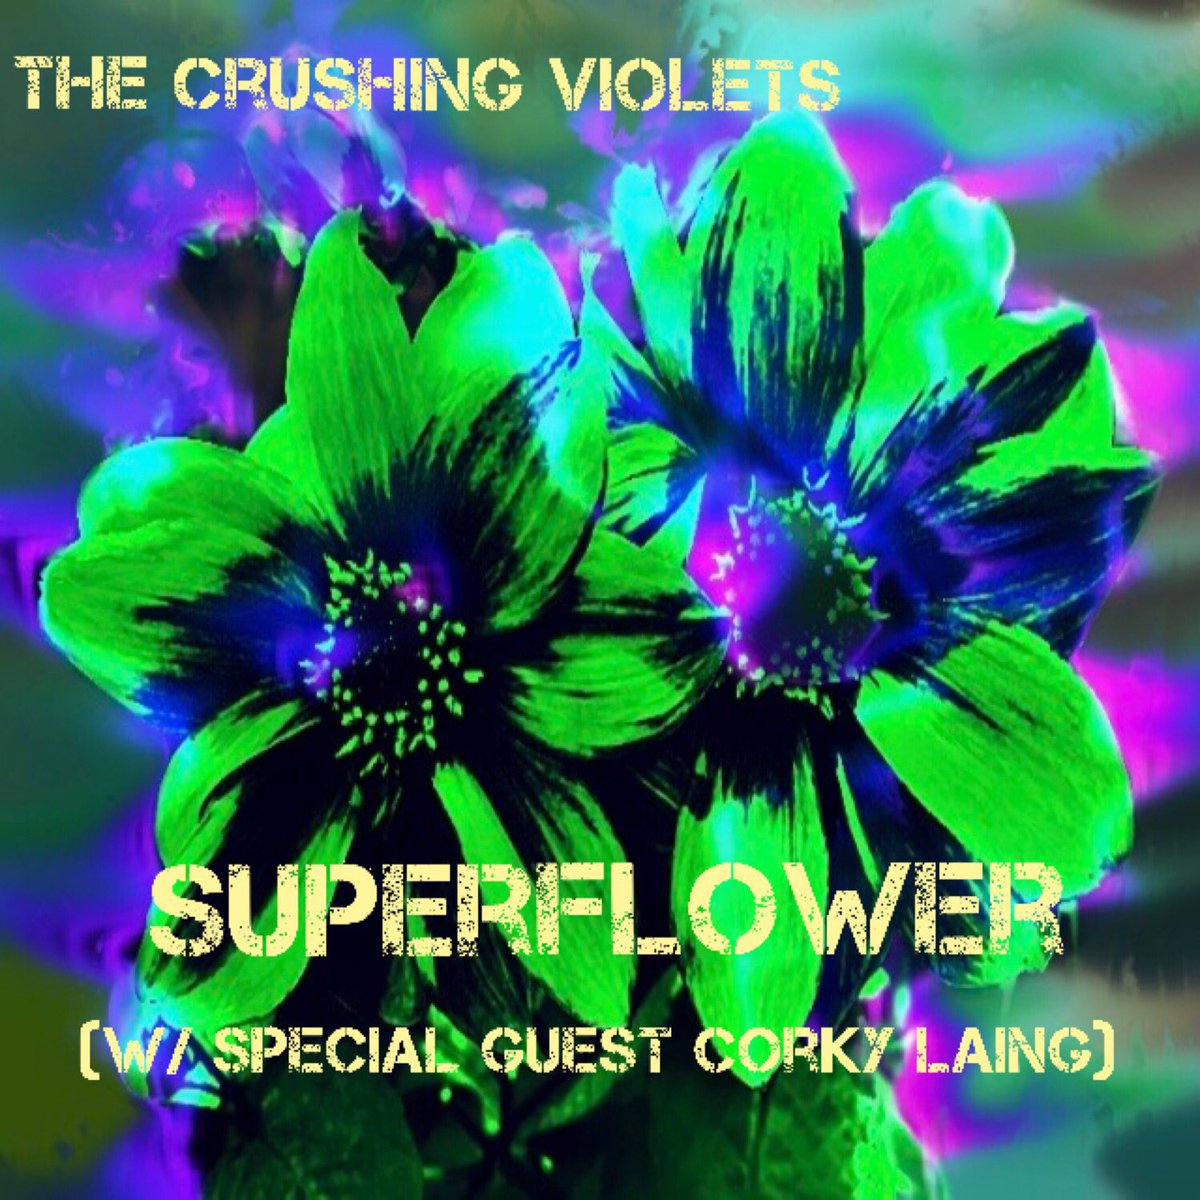 Thank you @60sPsychJukebox for playing our song Superflower! 🤩 thecrushingviolets.bandcamp.com/track/superflo… #indie #artist #Wednesdayvibe #rock #song